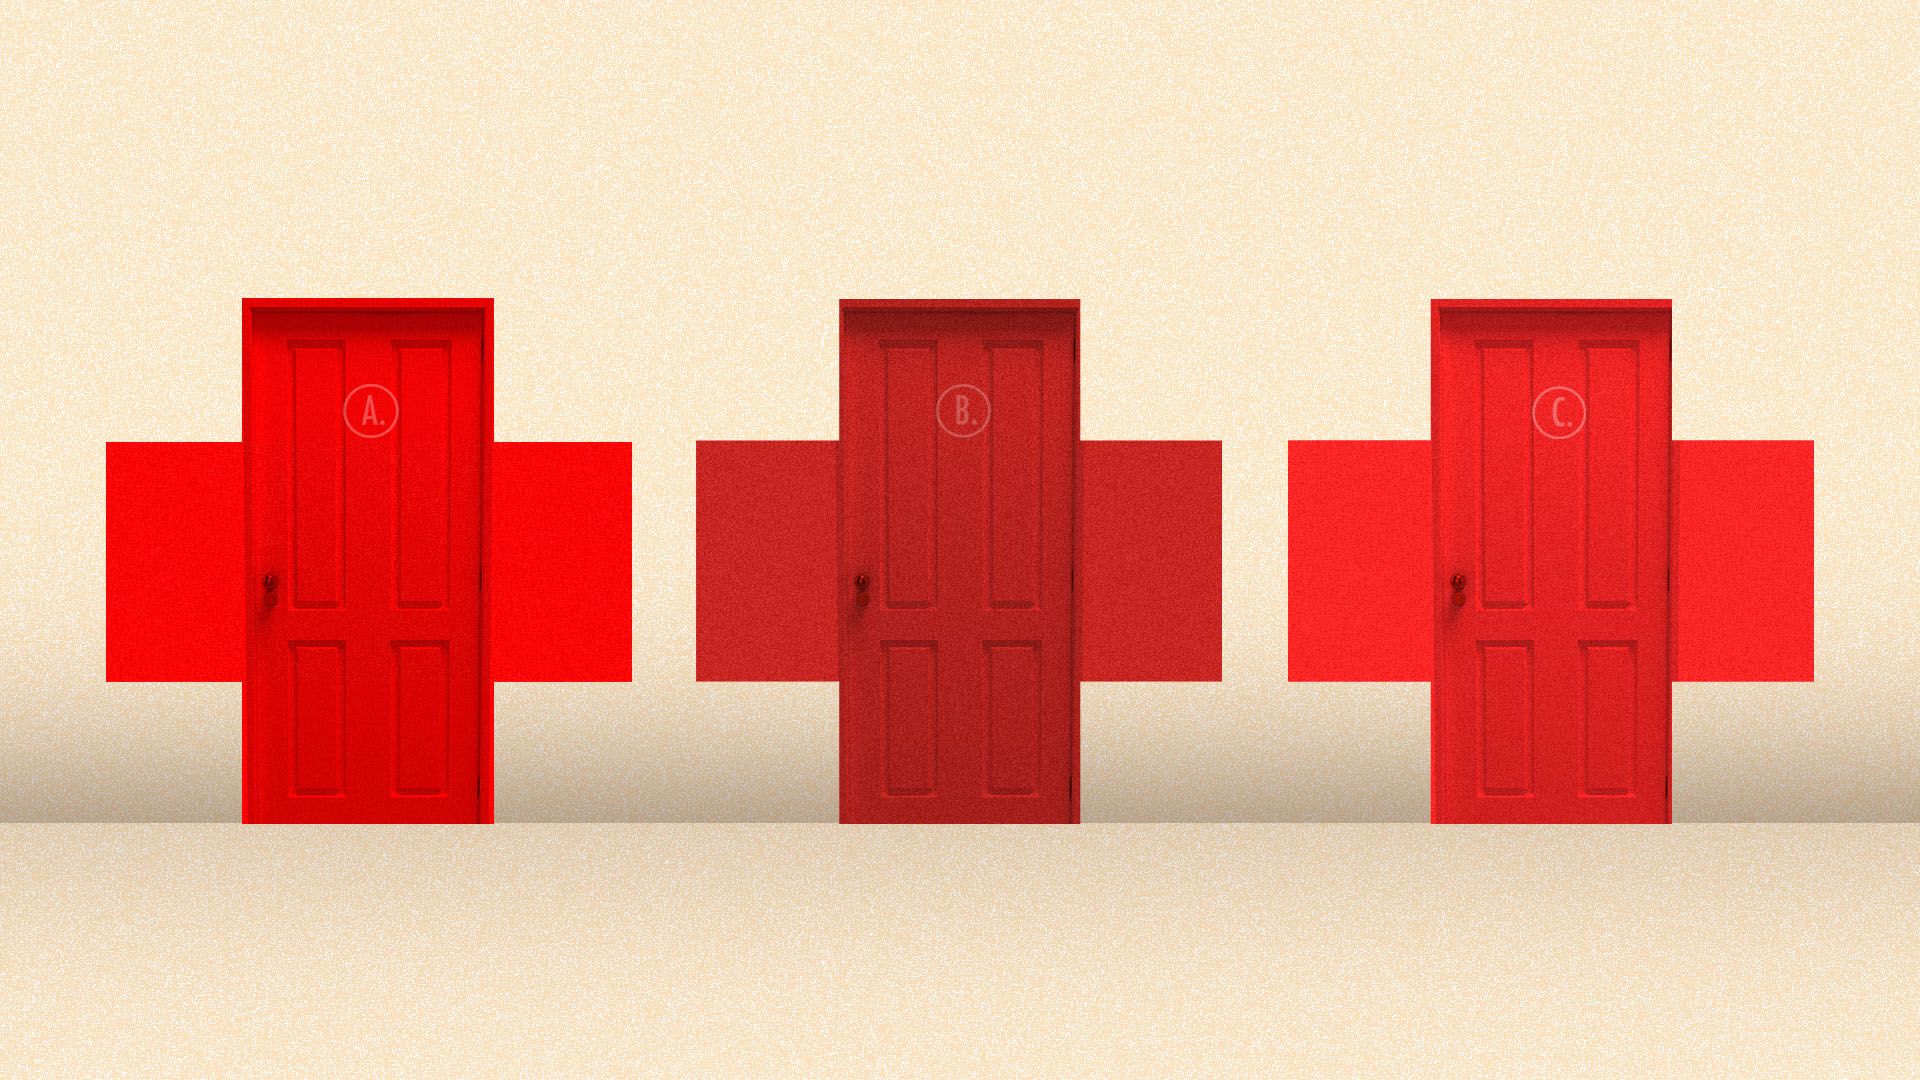 Illustration of three doors shaped like red crosses, labeled A, B, and C